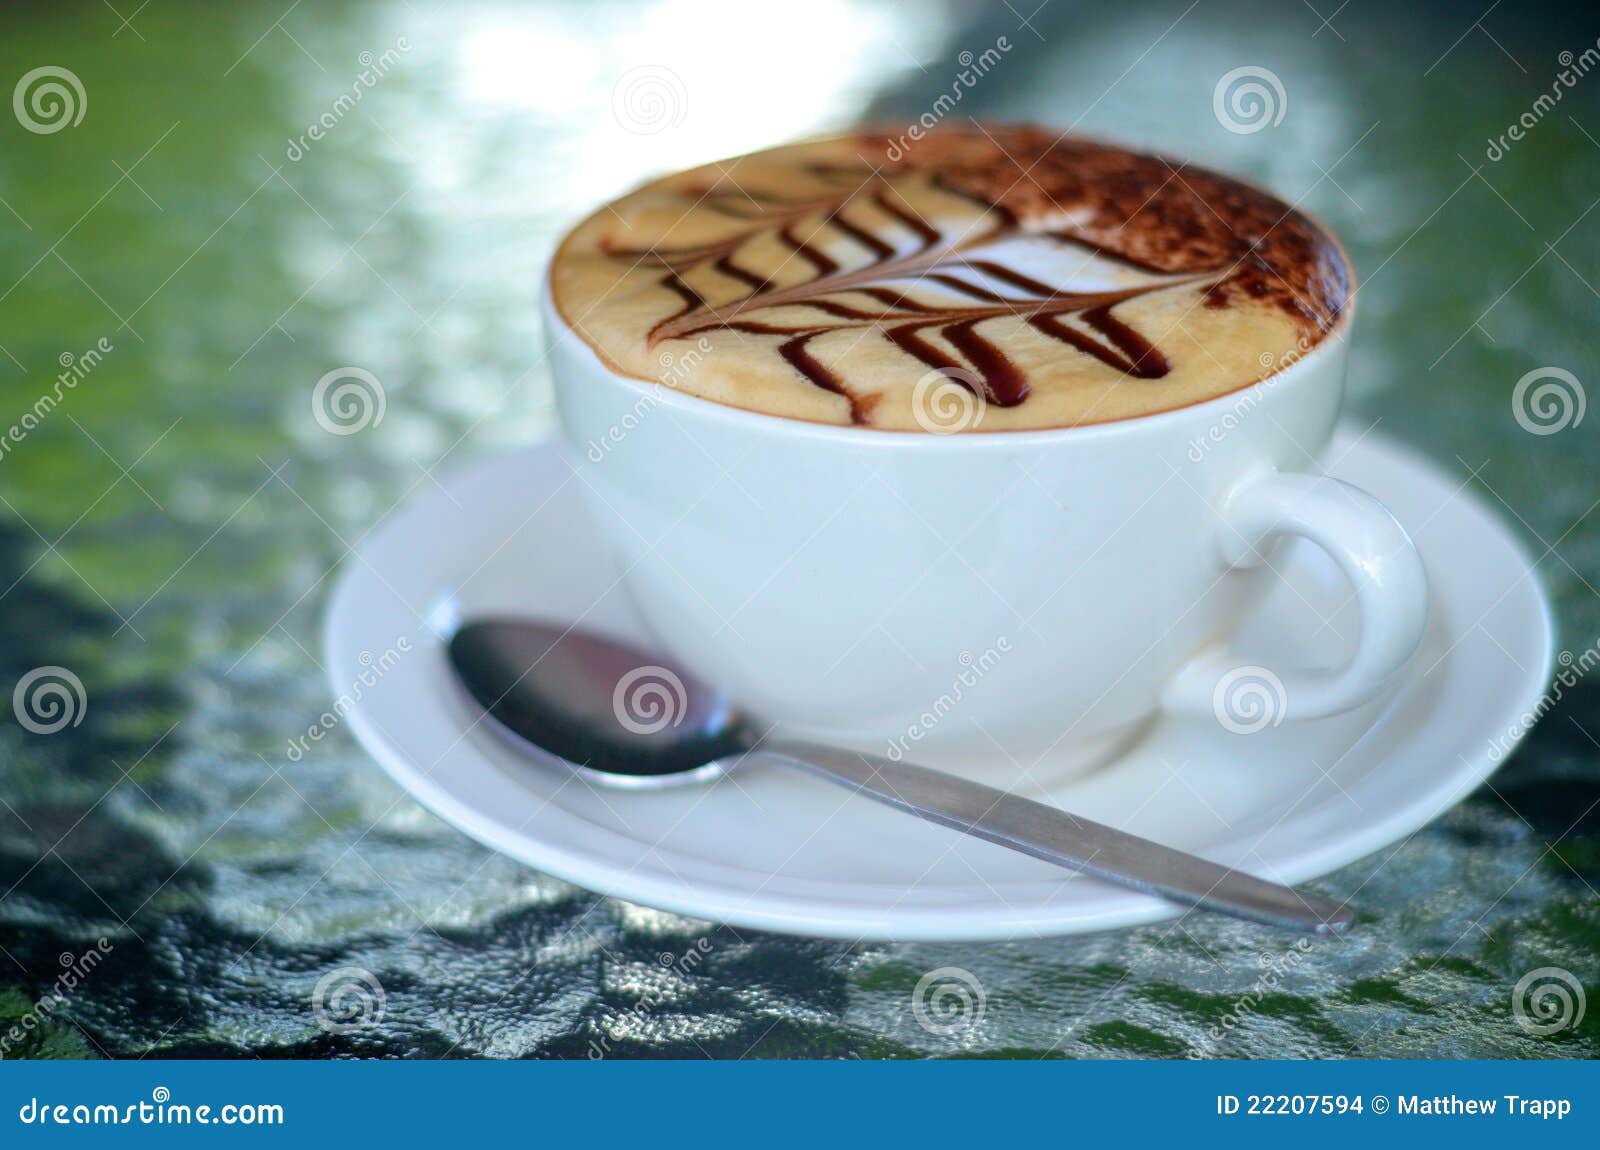  - side-view-cappuccino-coffee-cup-spoon-22207594